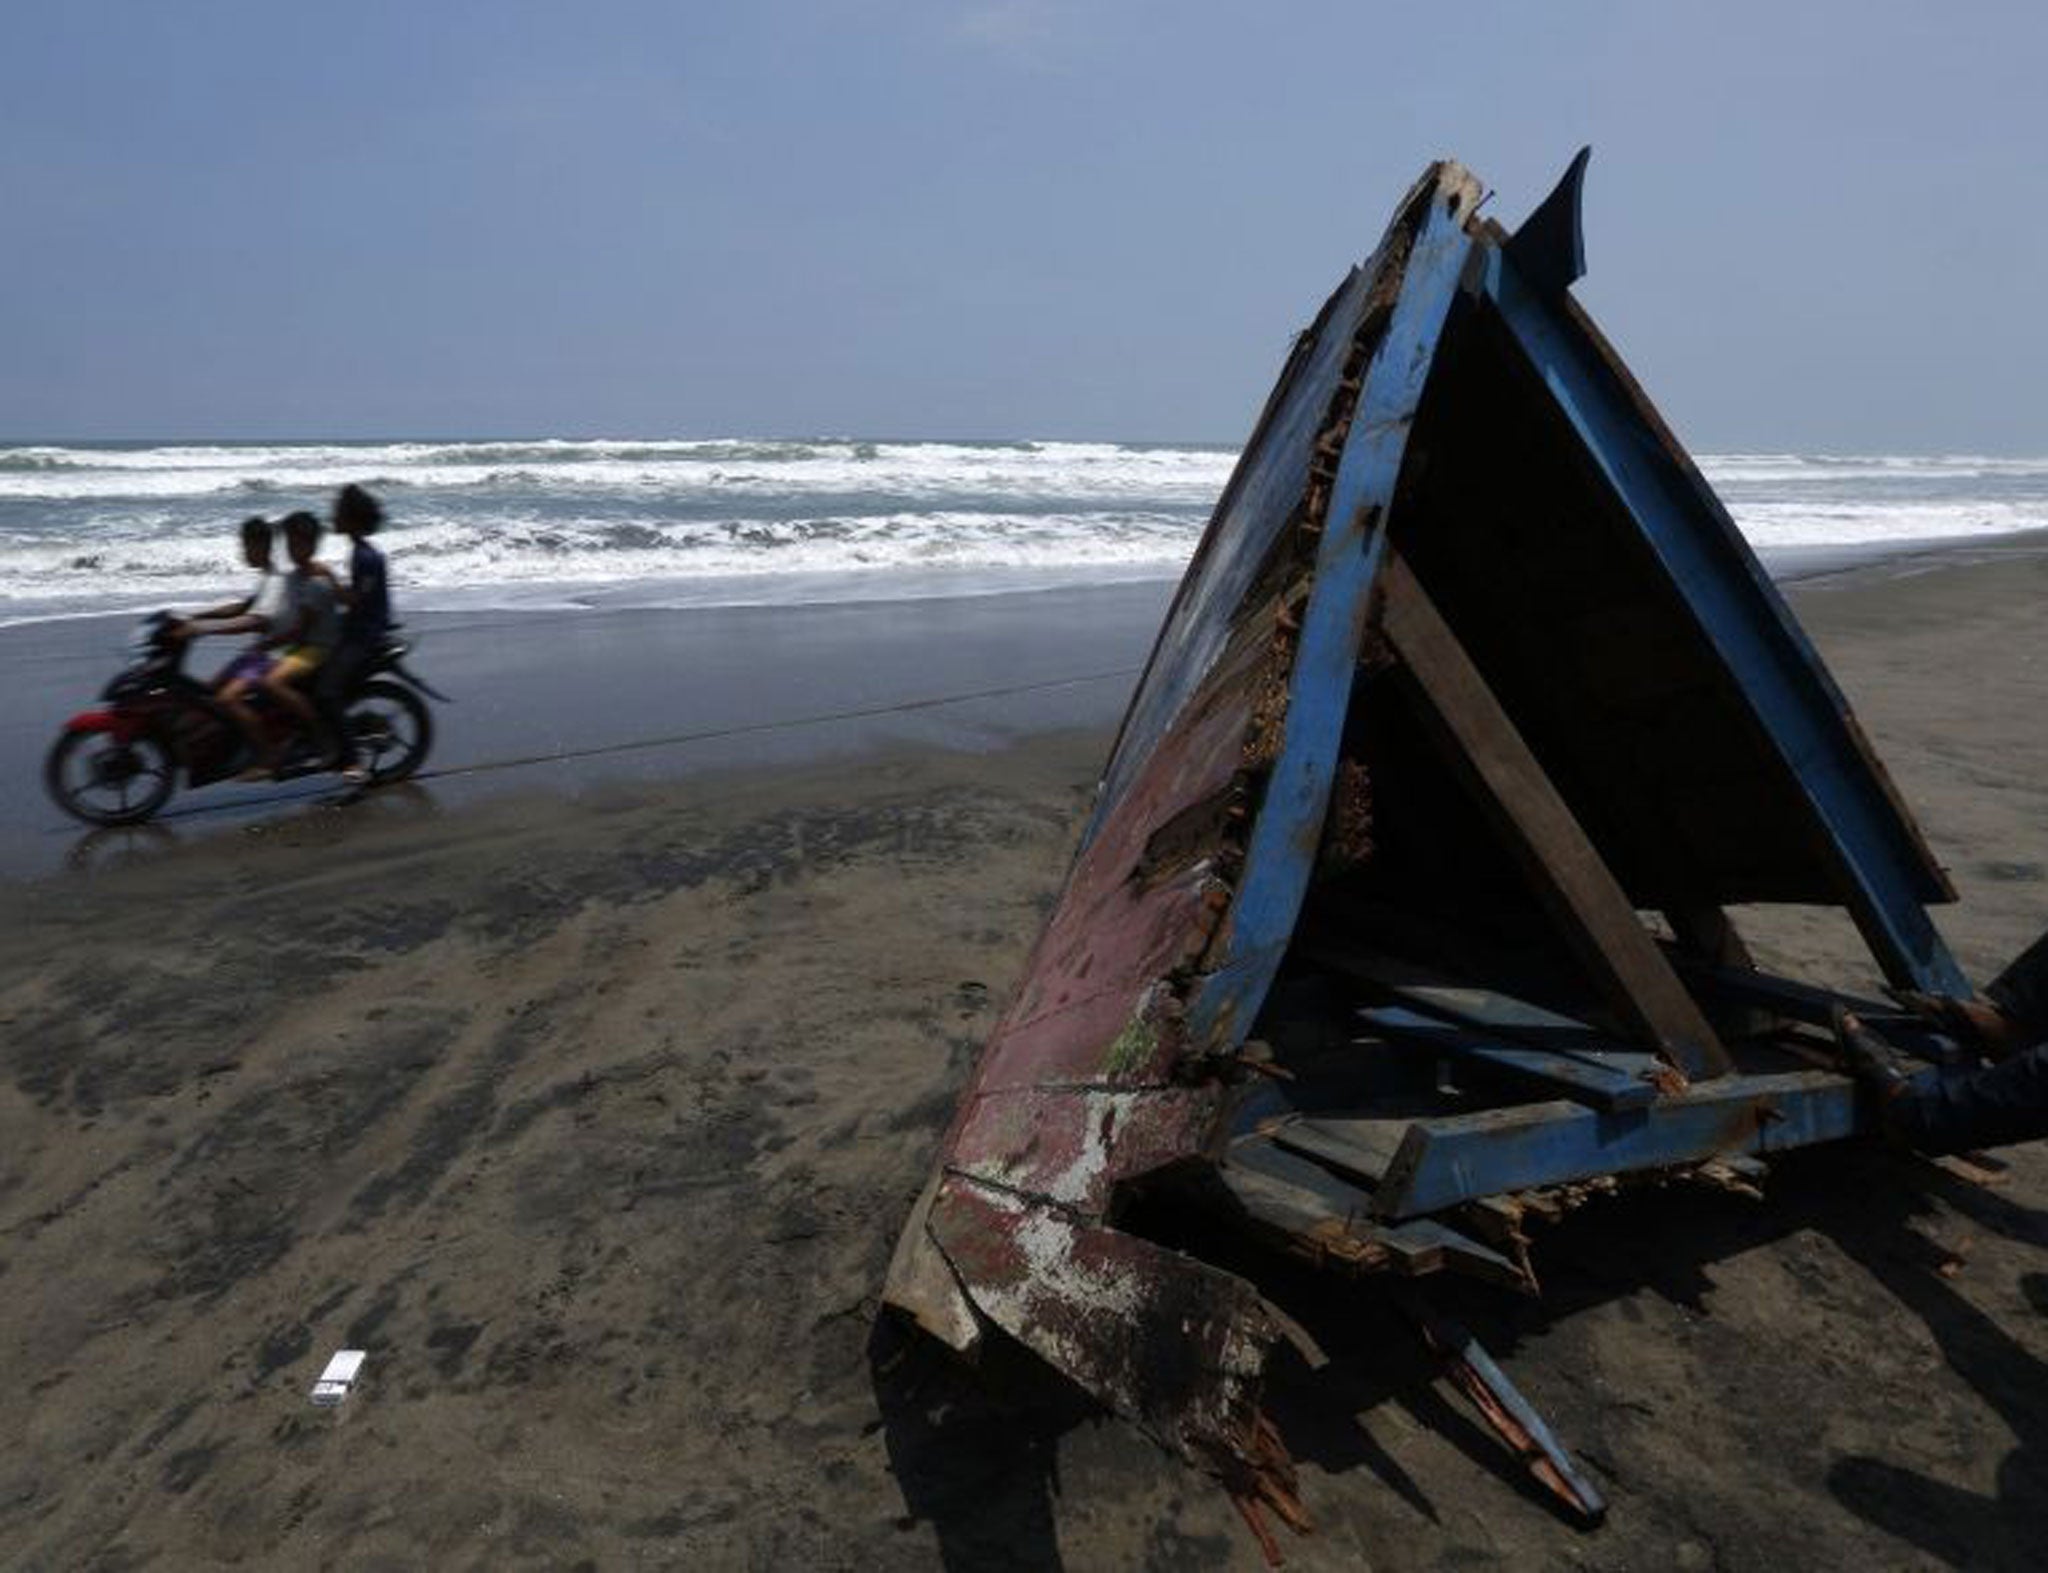 A piece of the boat's wreckage washed up on an Indonesian beach